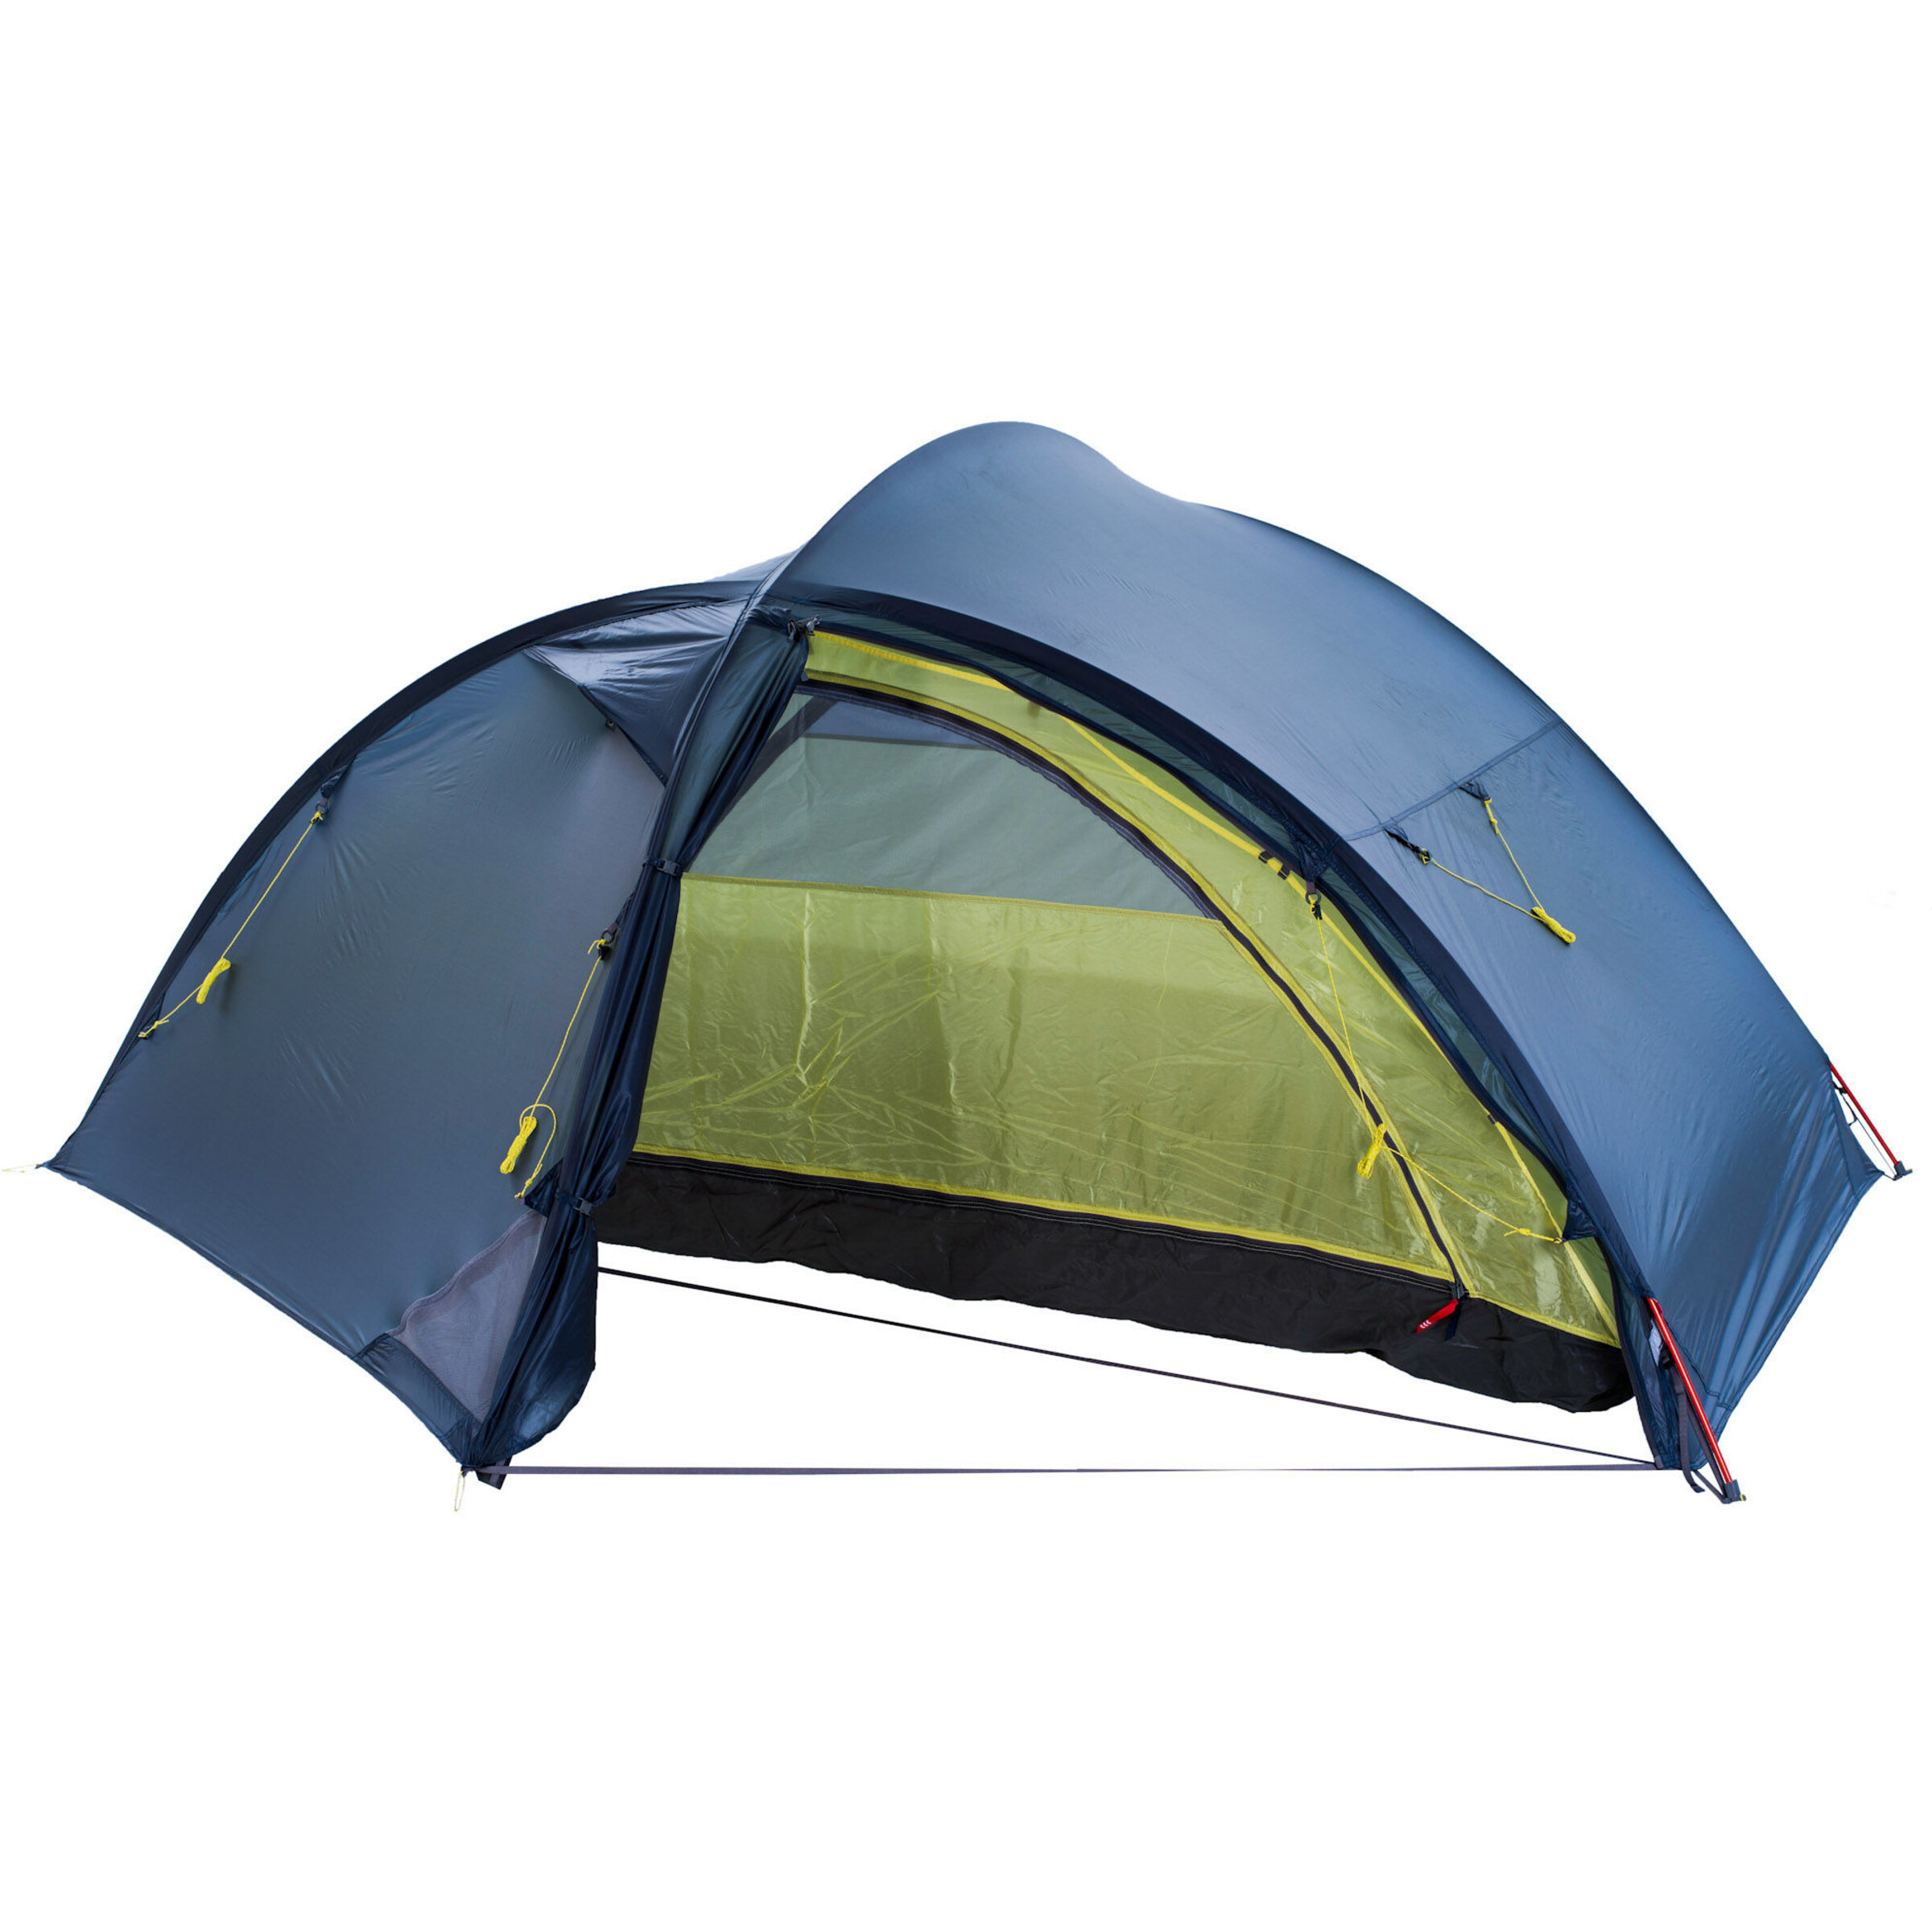 Browse Helsport camping equipment on Addnature